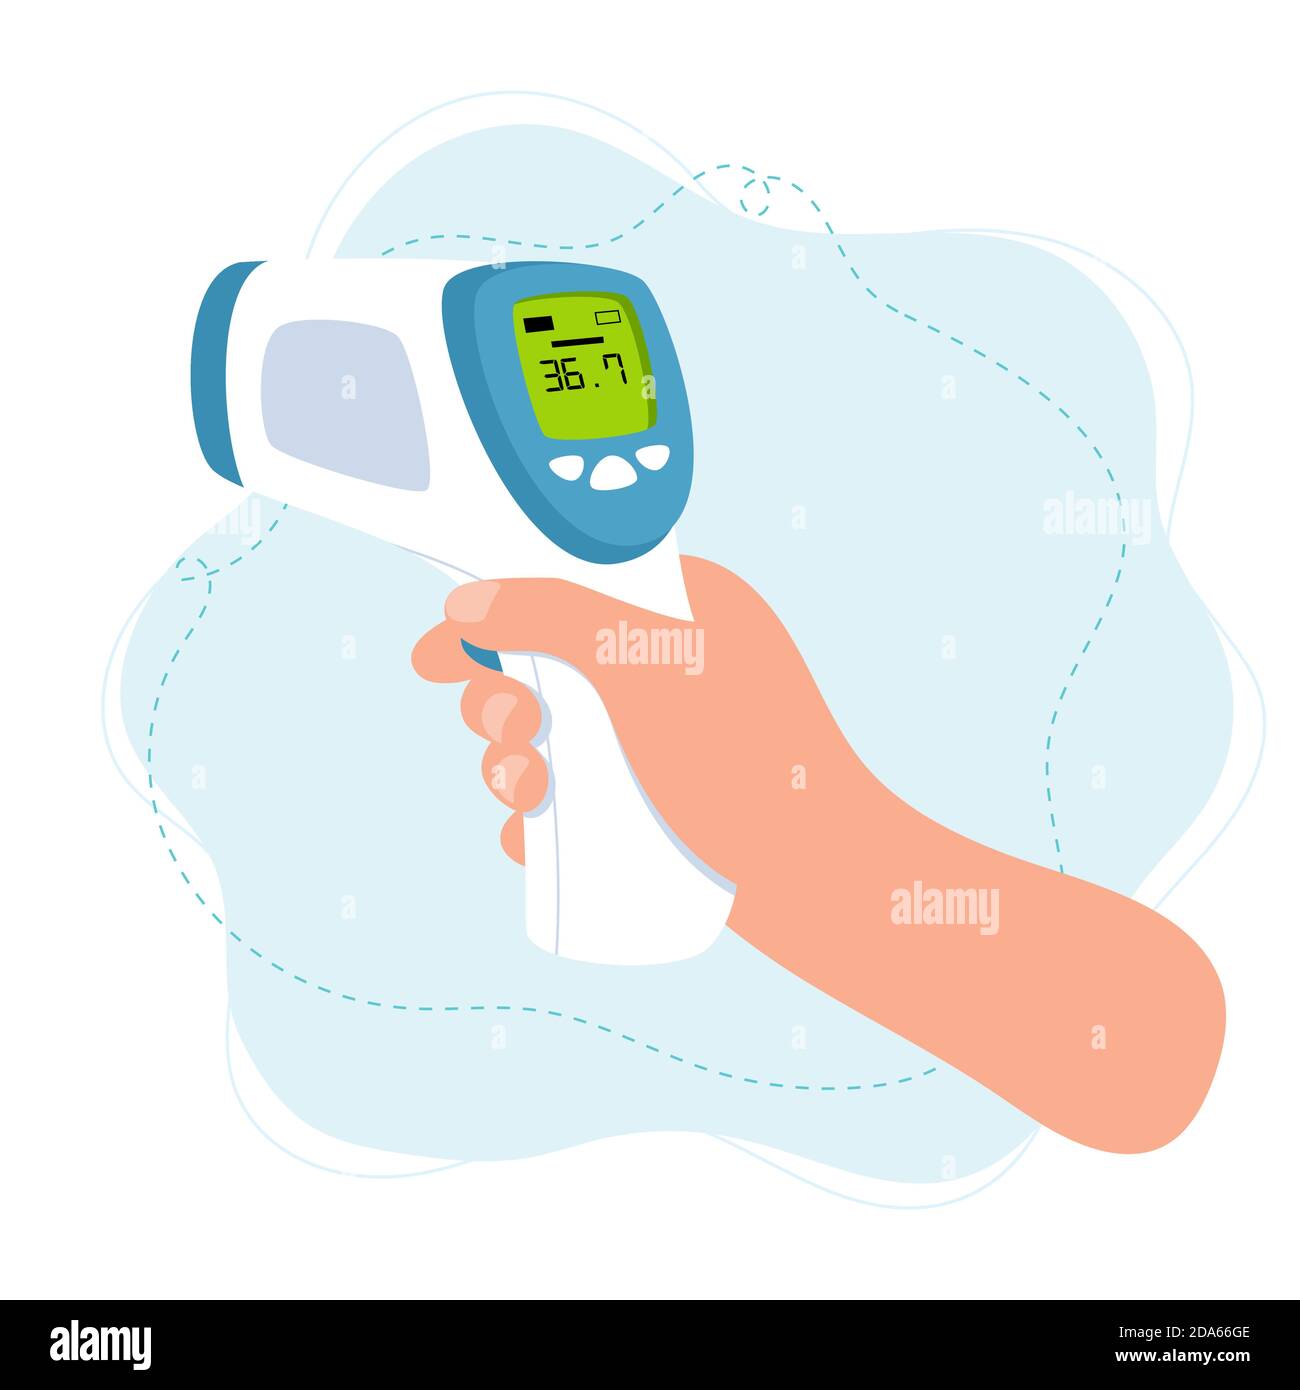 Body temperature check, hand holding infrared thermometer. Stock Vector